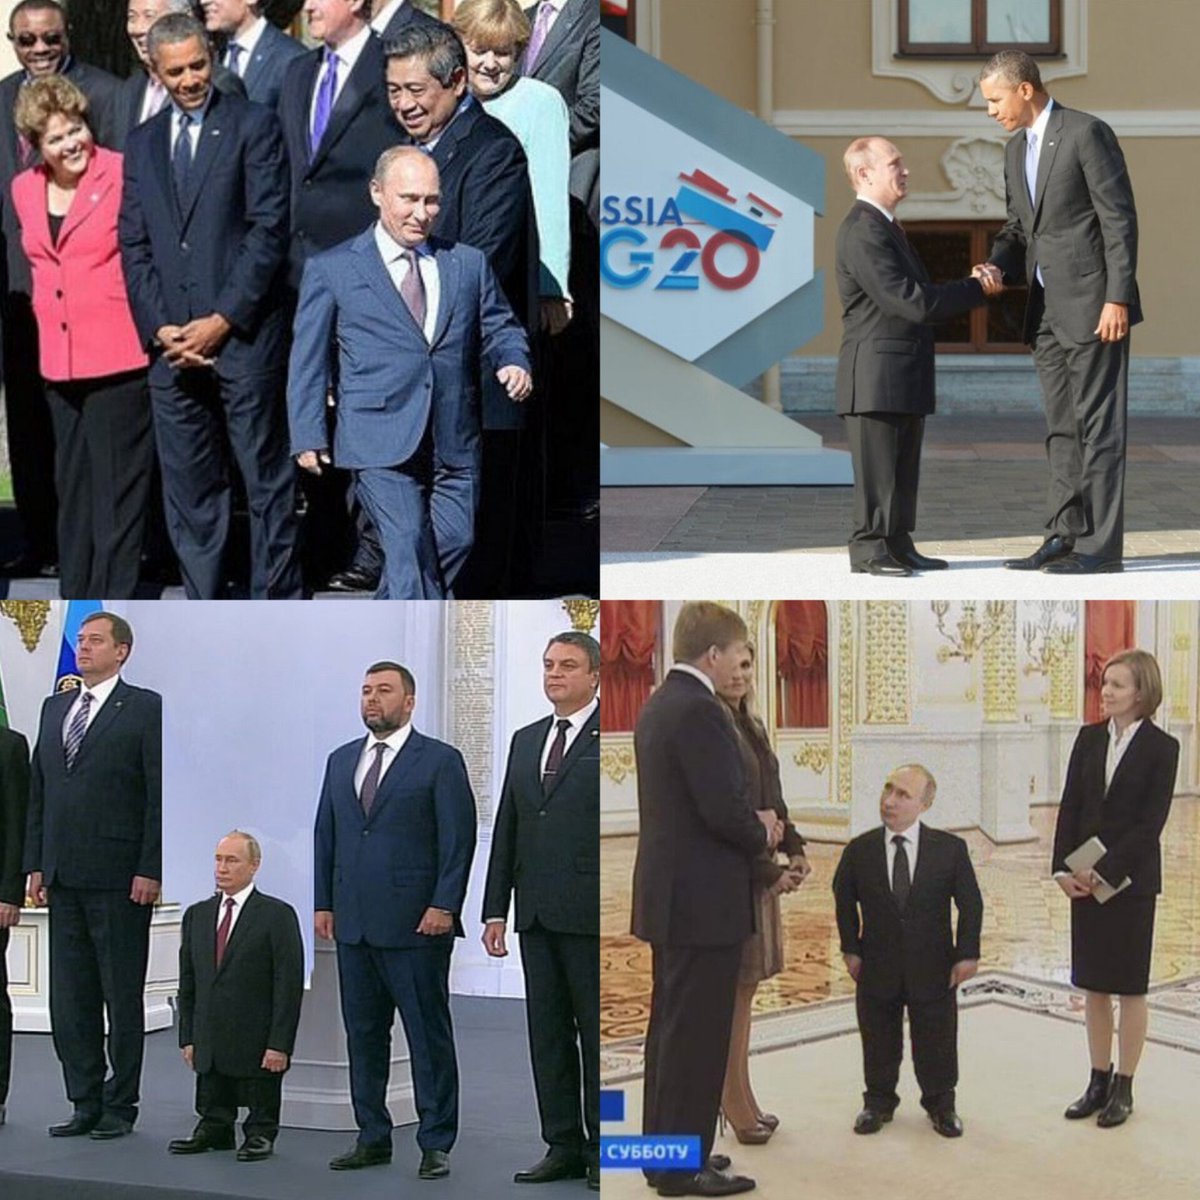 Did you know? Vladimir Putin, at 140cm tall, holds the record for being the shortest dictator in Russian history! 😯

Follow me for more interesting facts!

#DYK #Putin #Путин #Россия